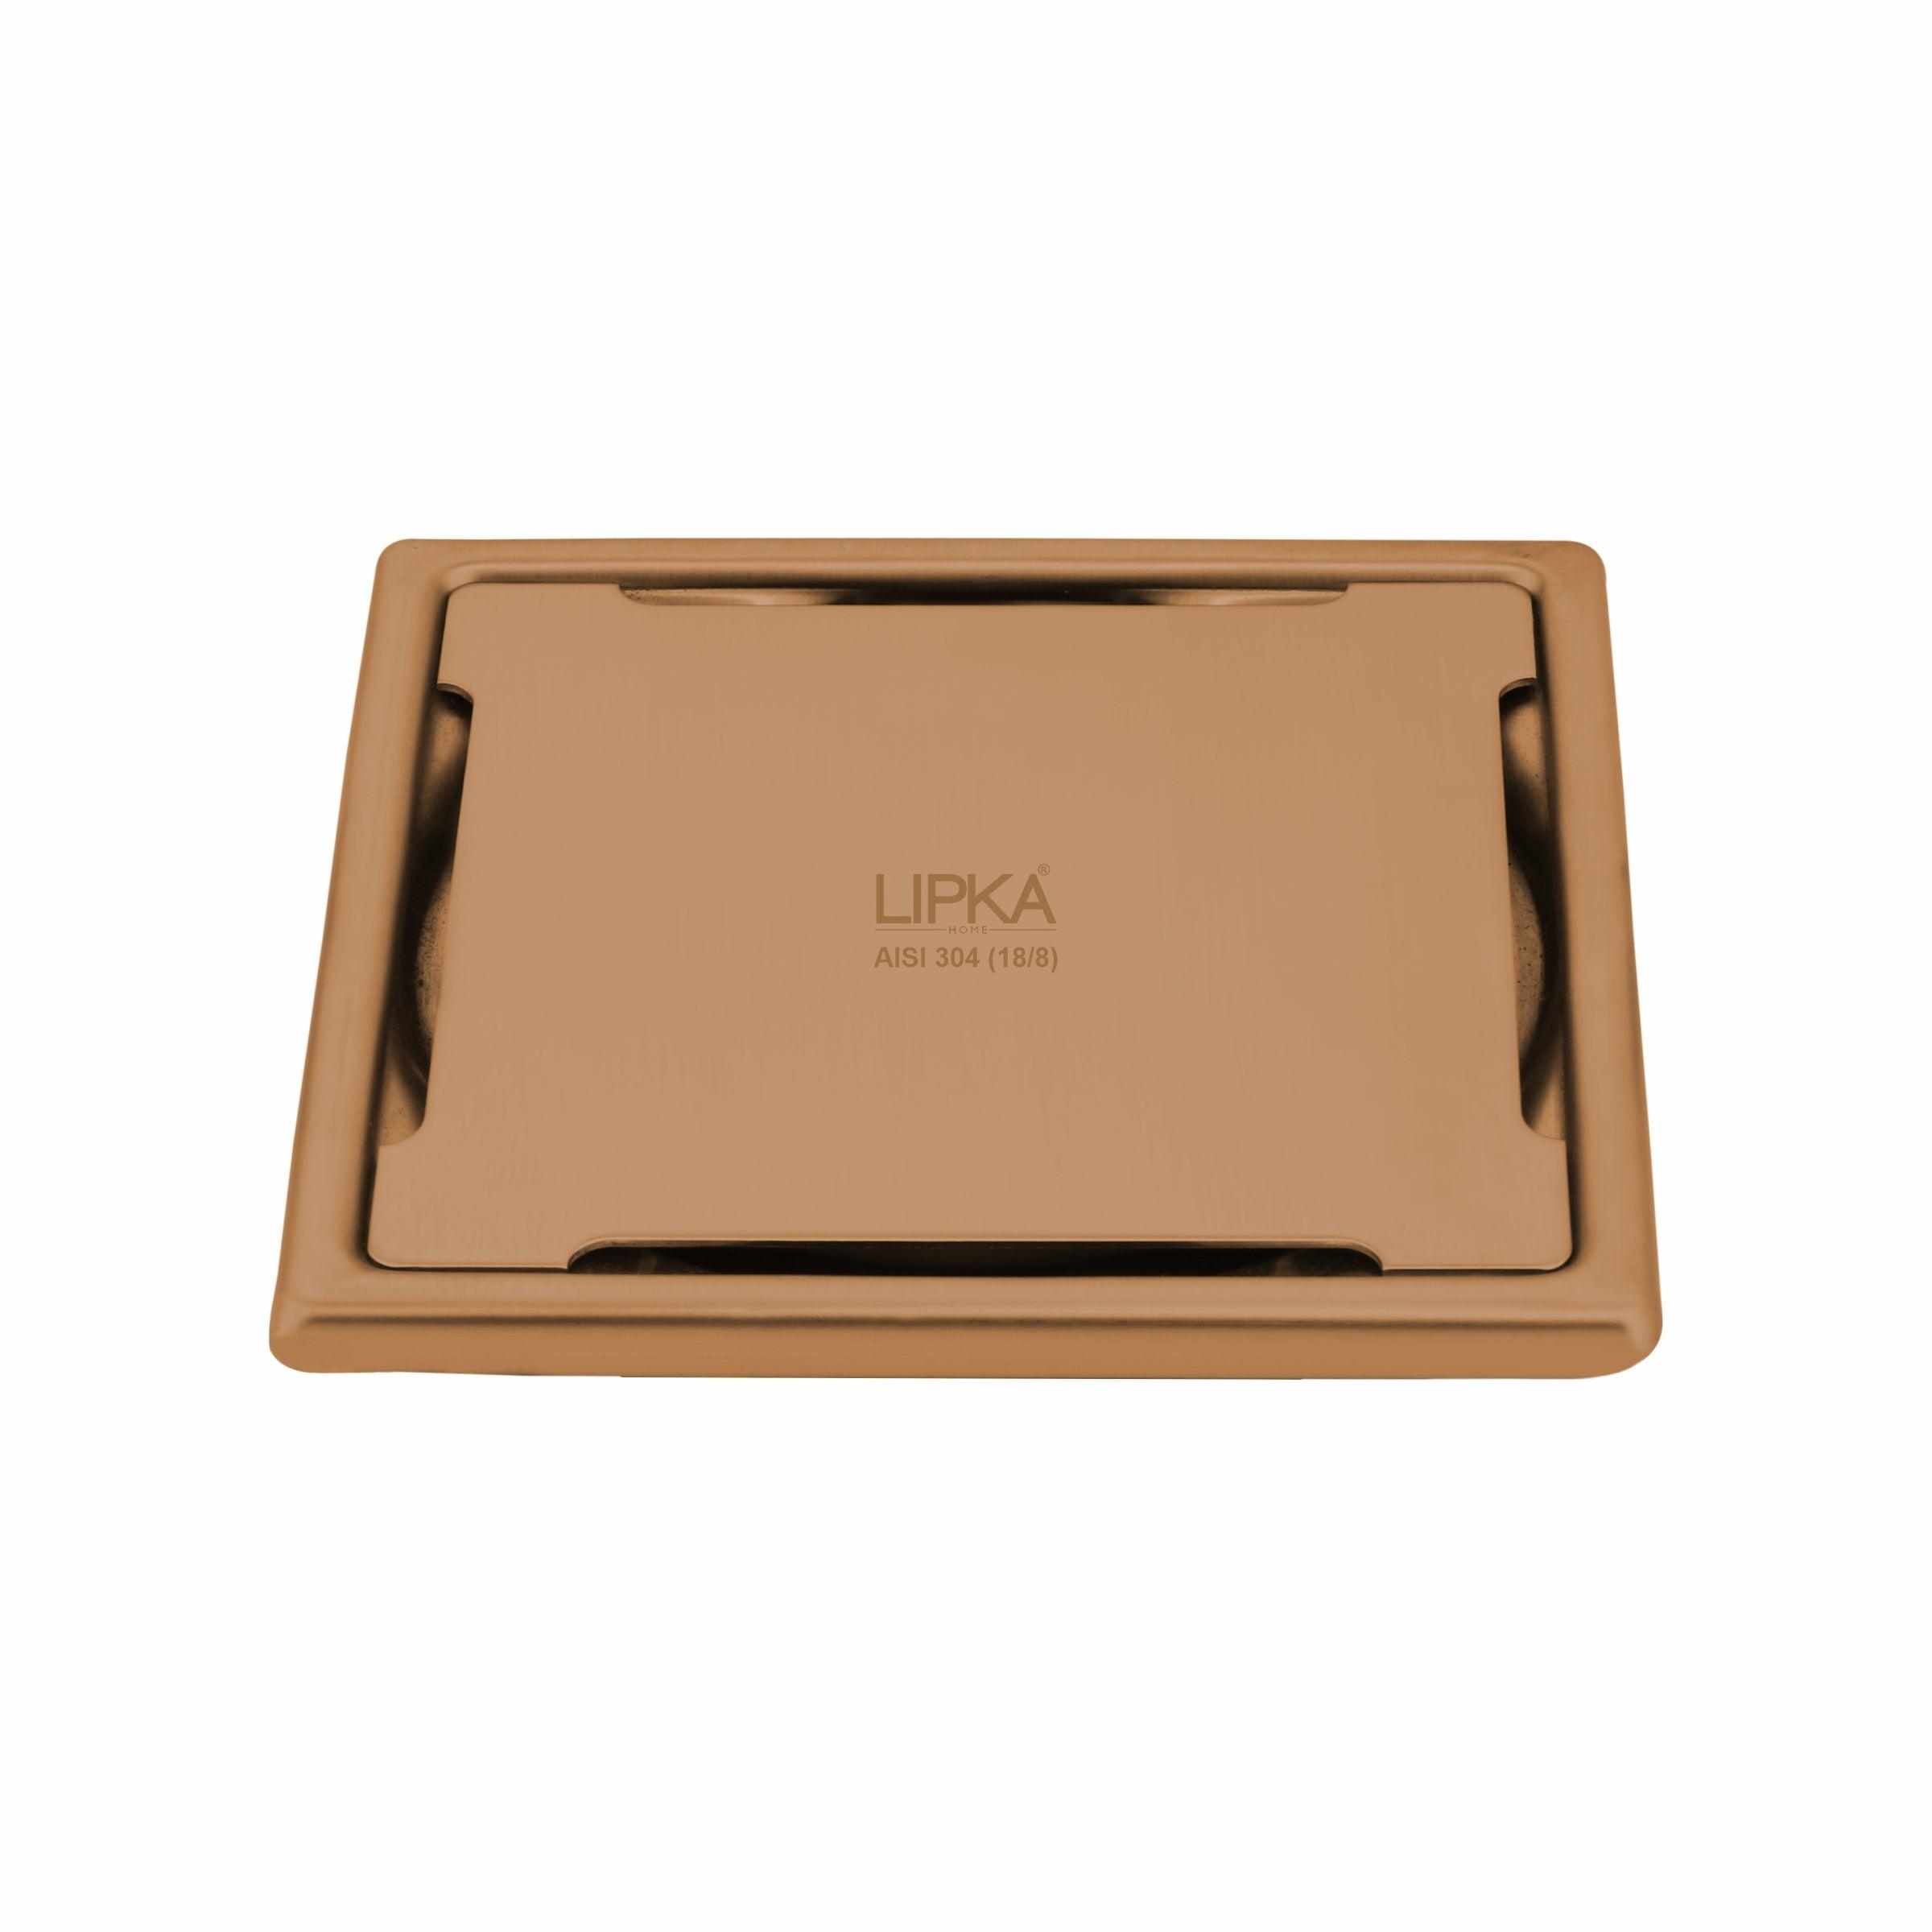 Yellow Exclusive Square Floor Drain in Antique Copper PVD Coating (6 x 6 Inches) - LIPKA